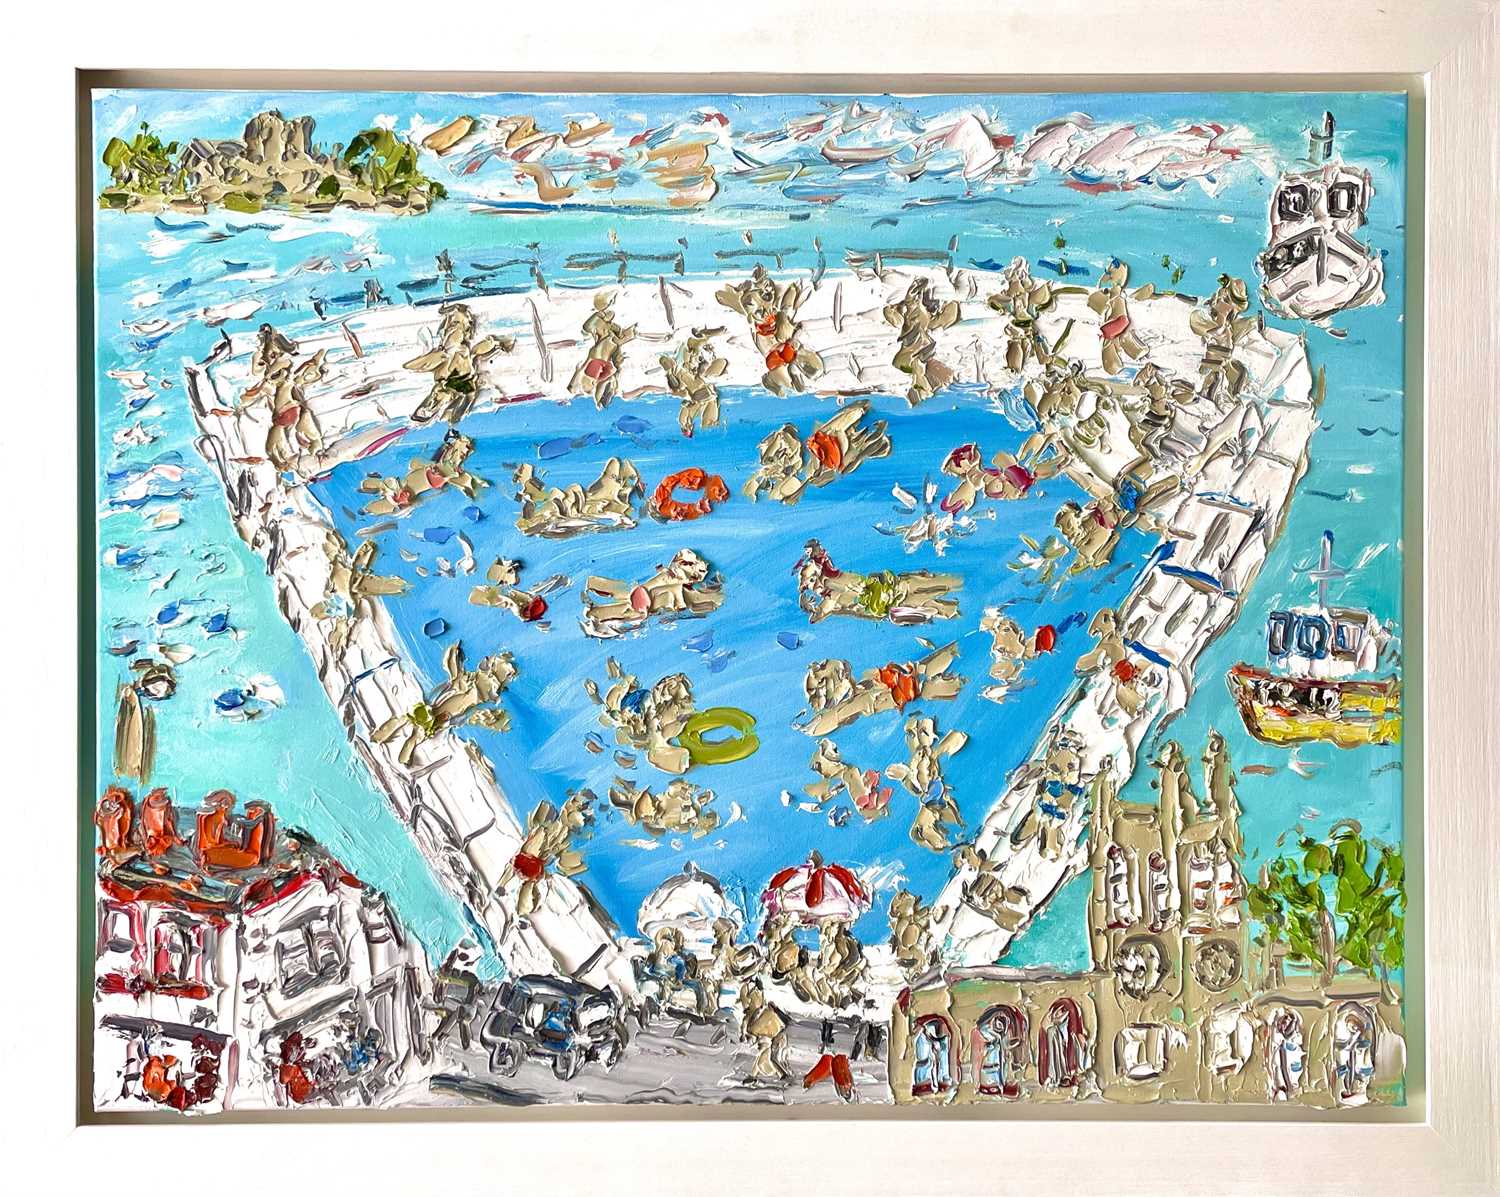 Sean HAYDEN (1979) Jubilee Pool Penzance Oil on canvas Signed to verso 70 x 90cm - Image 2 of 3